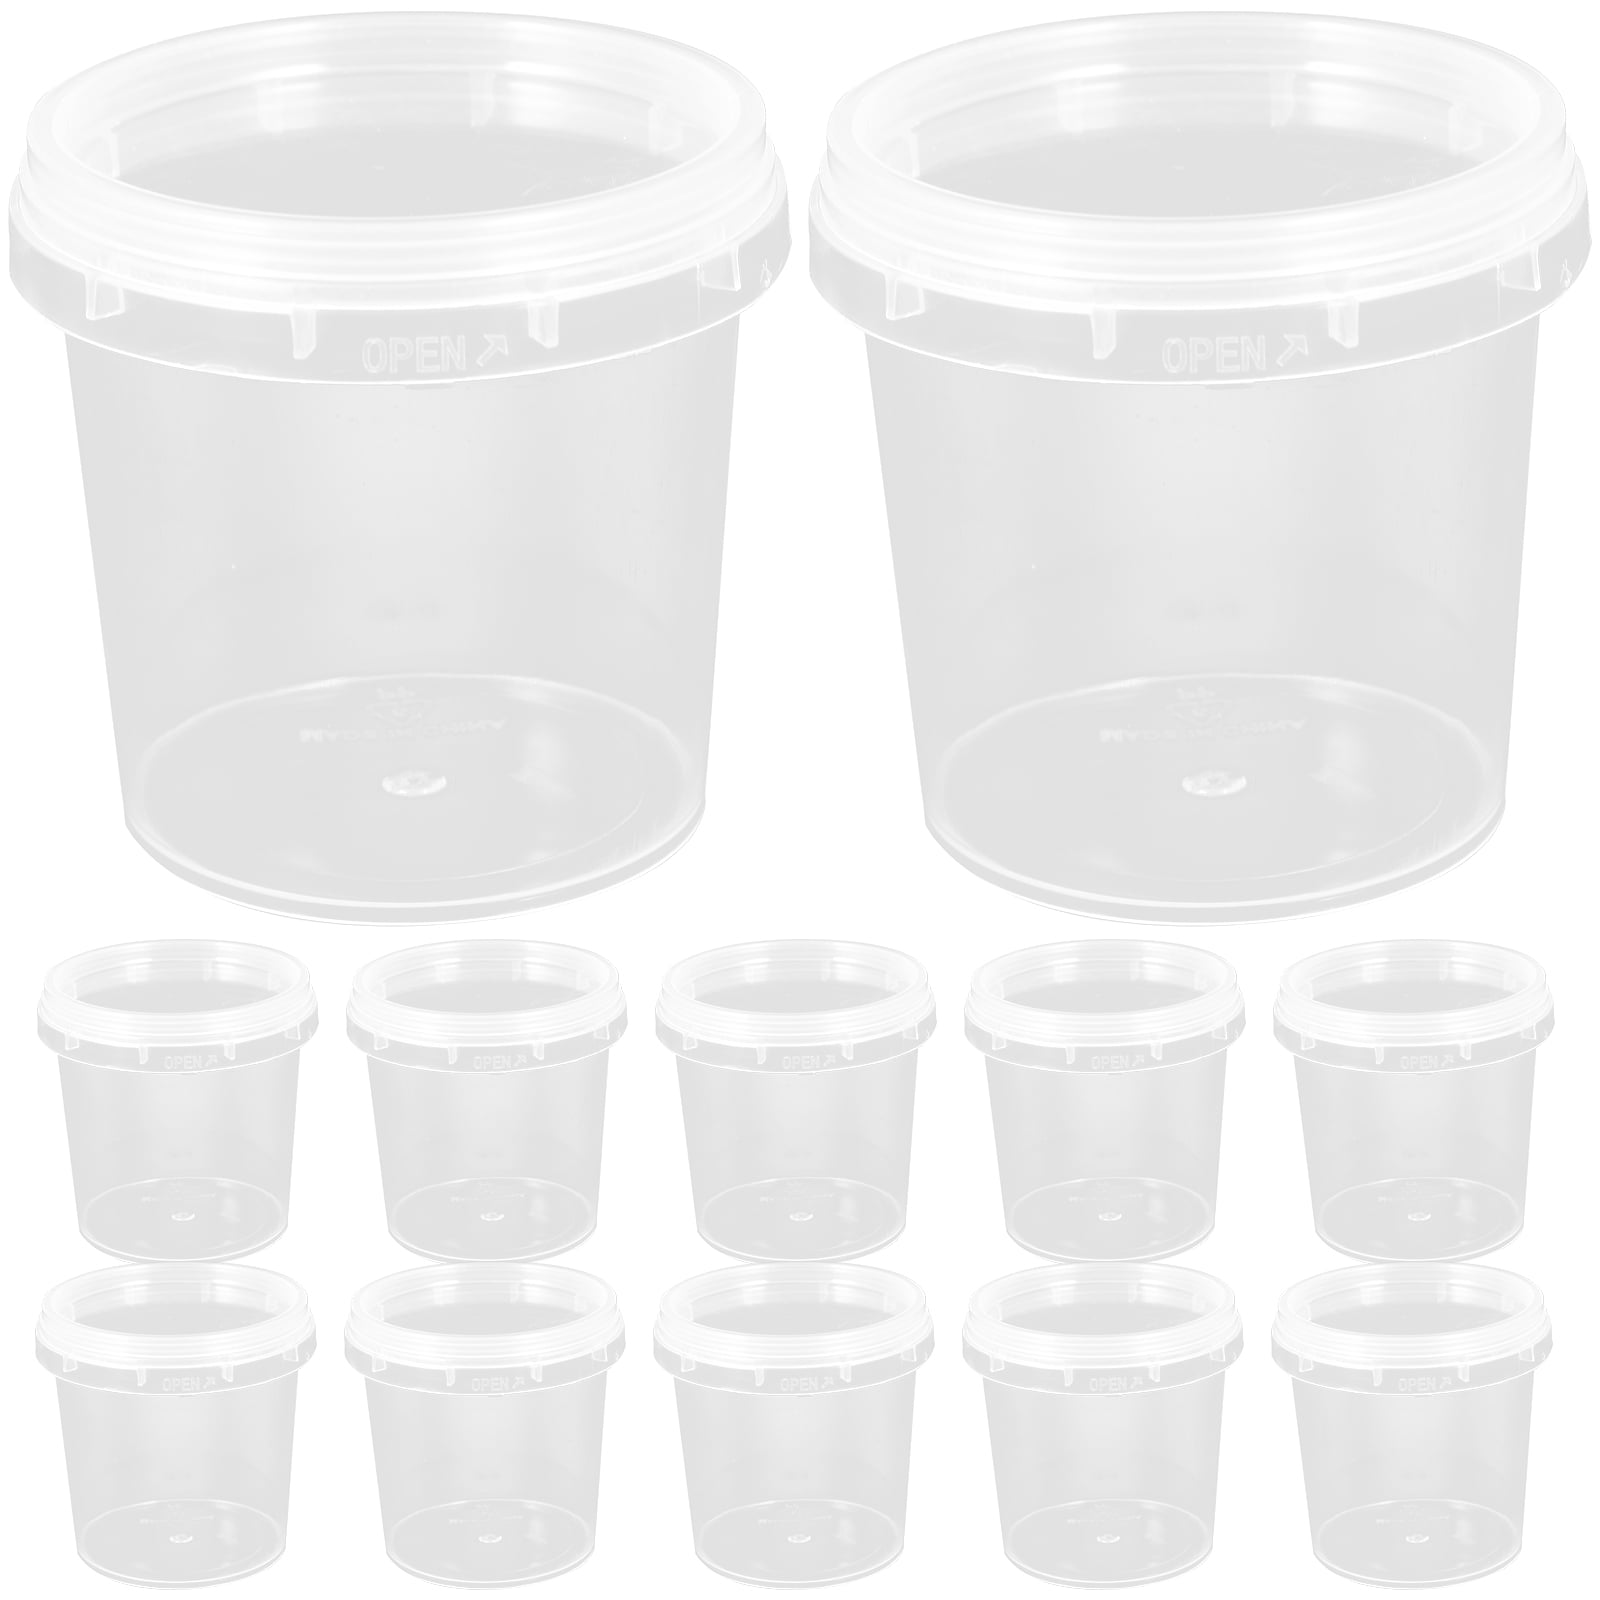 Small Clear Plastic Molded Bucket, Storage Container Bin for